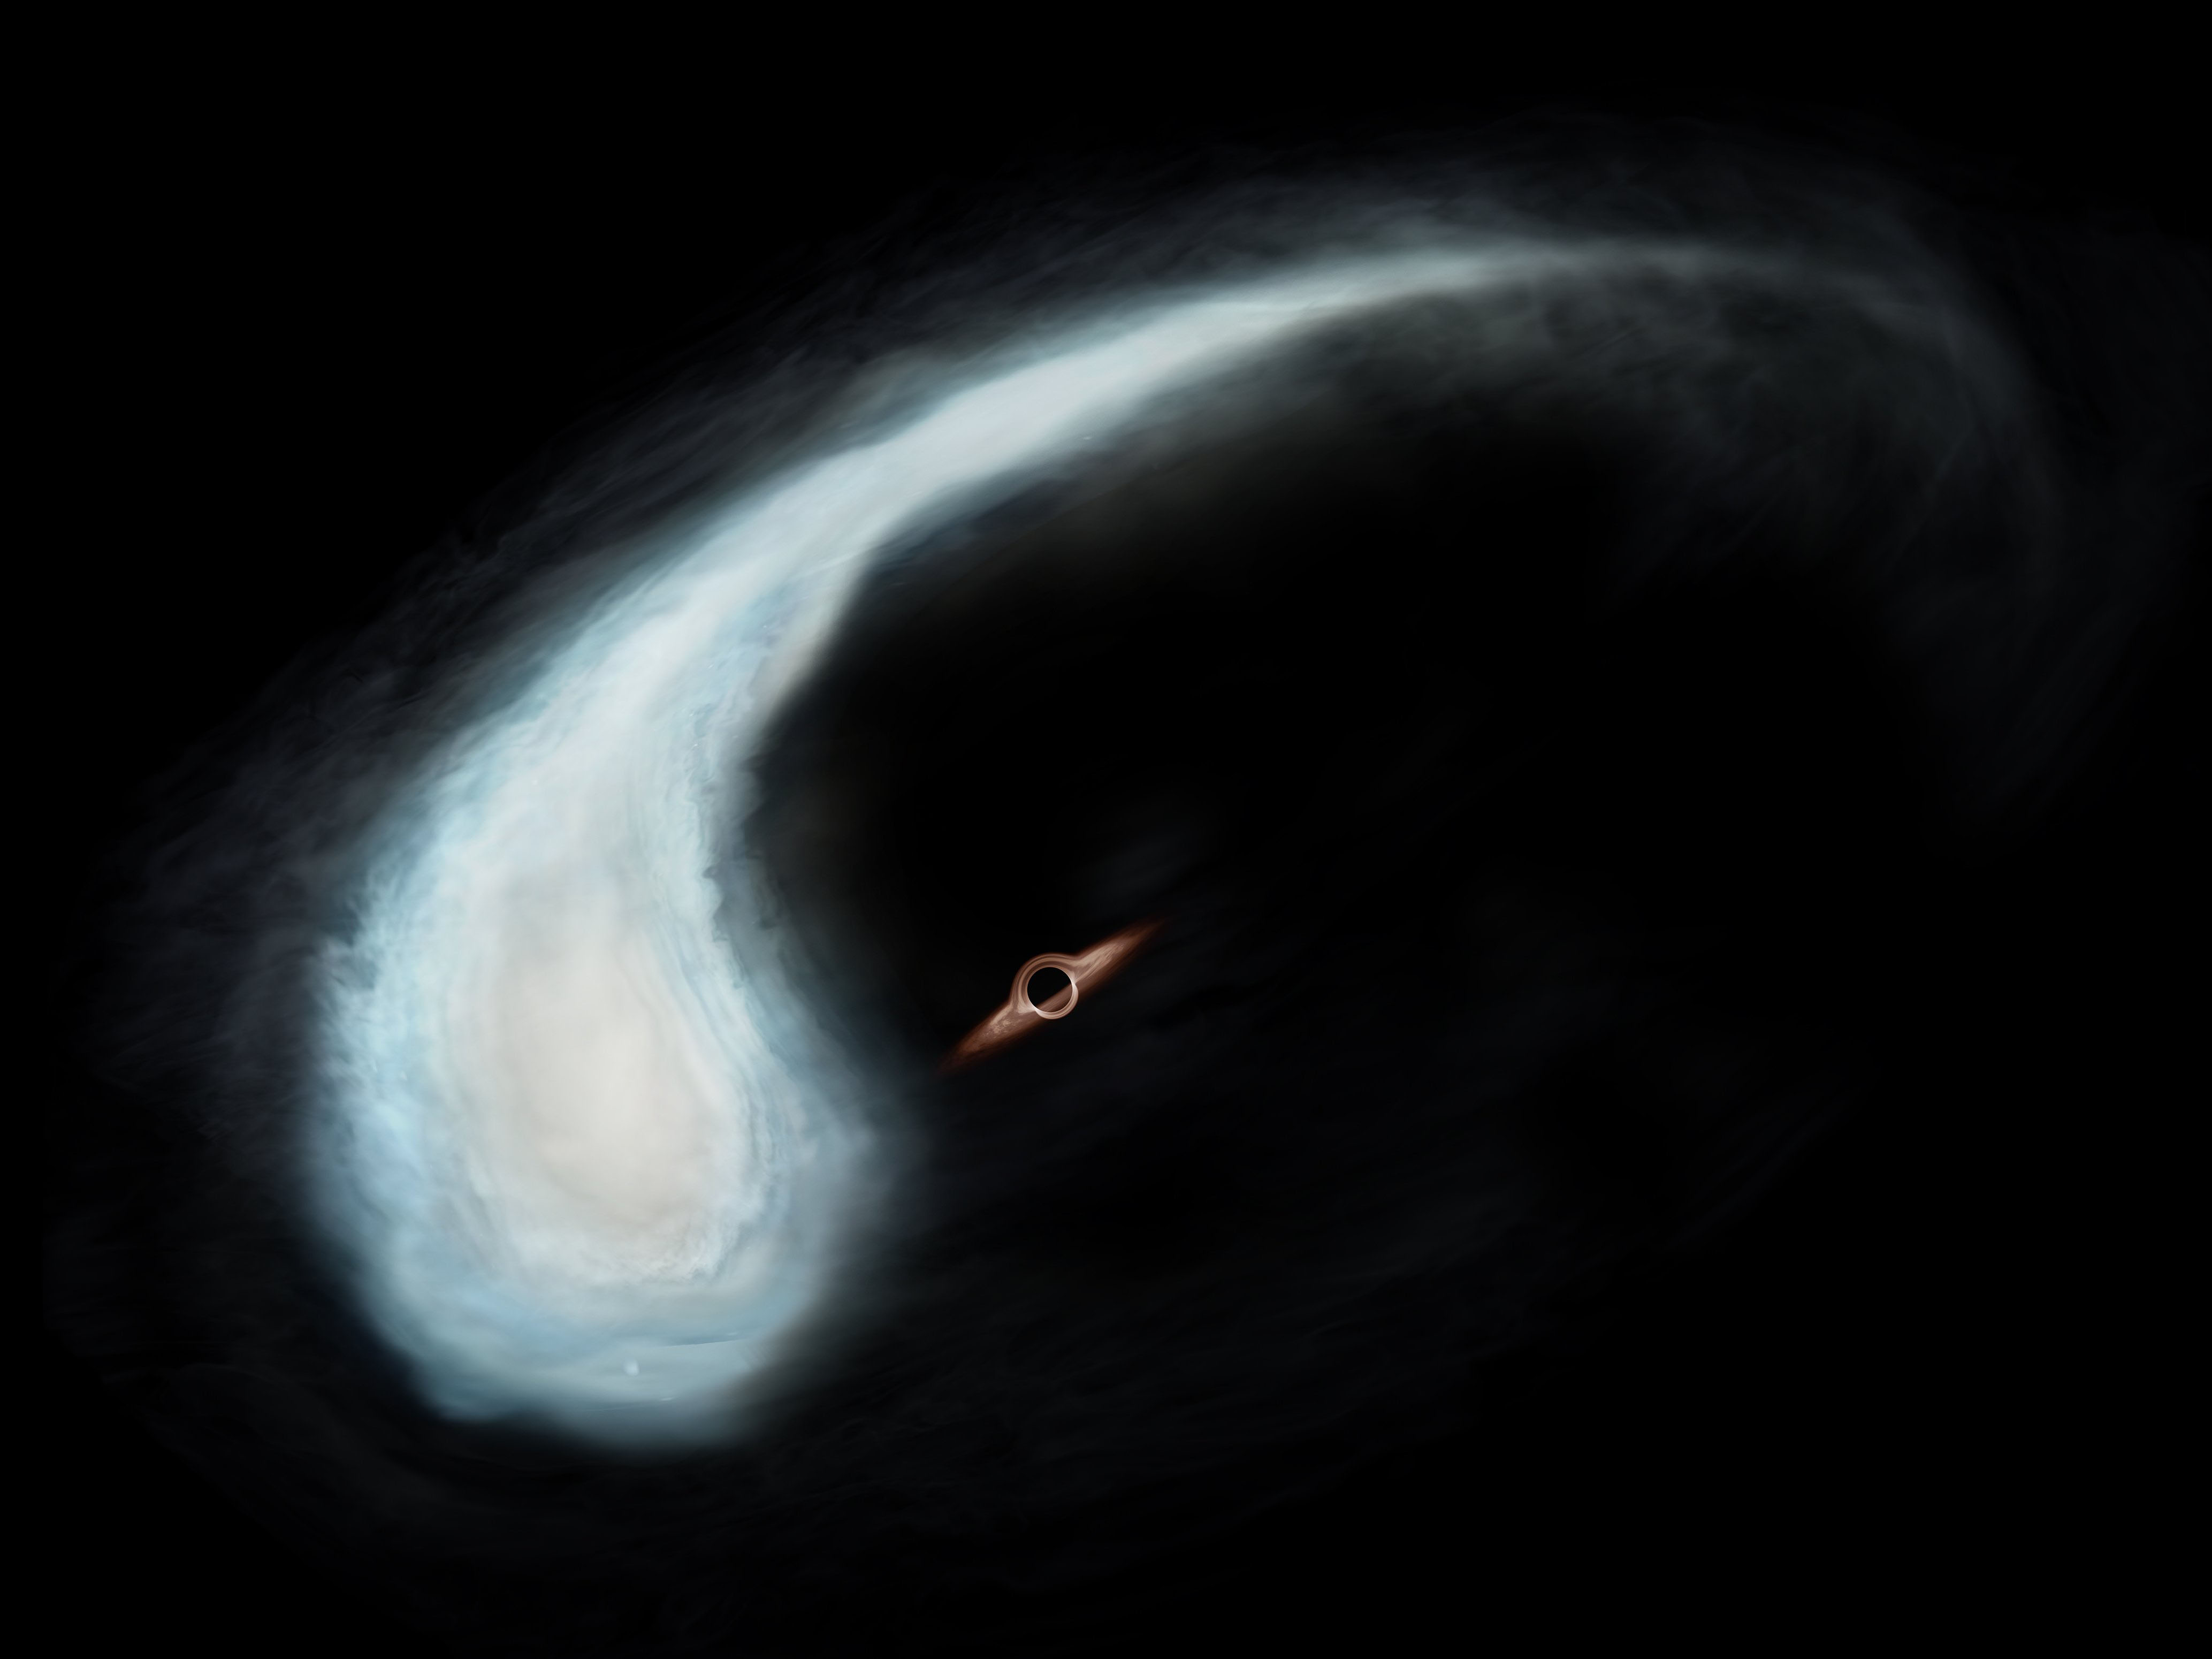 Artist’s impression of the Tadpole molecular cloud and the black hole at the gravitational center of its orbit